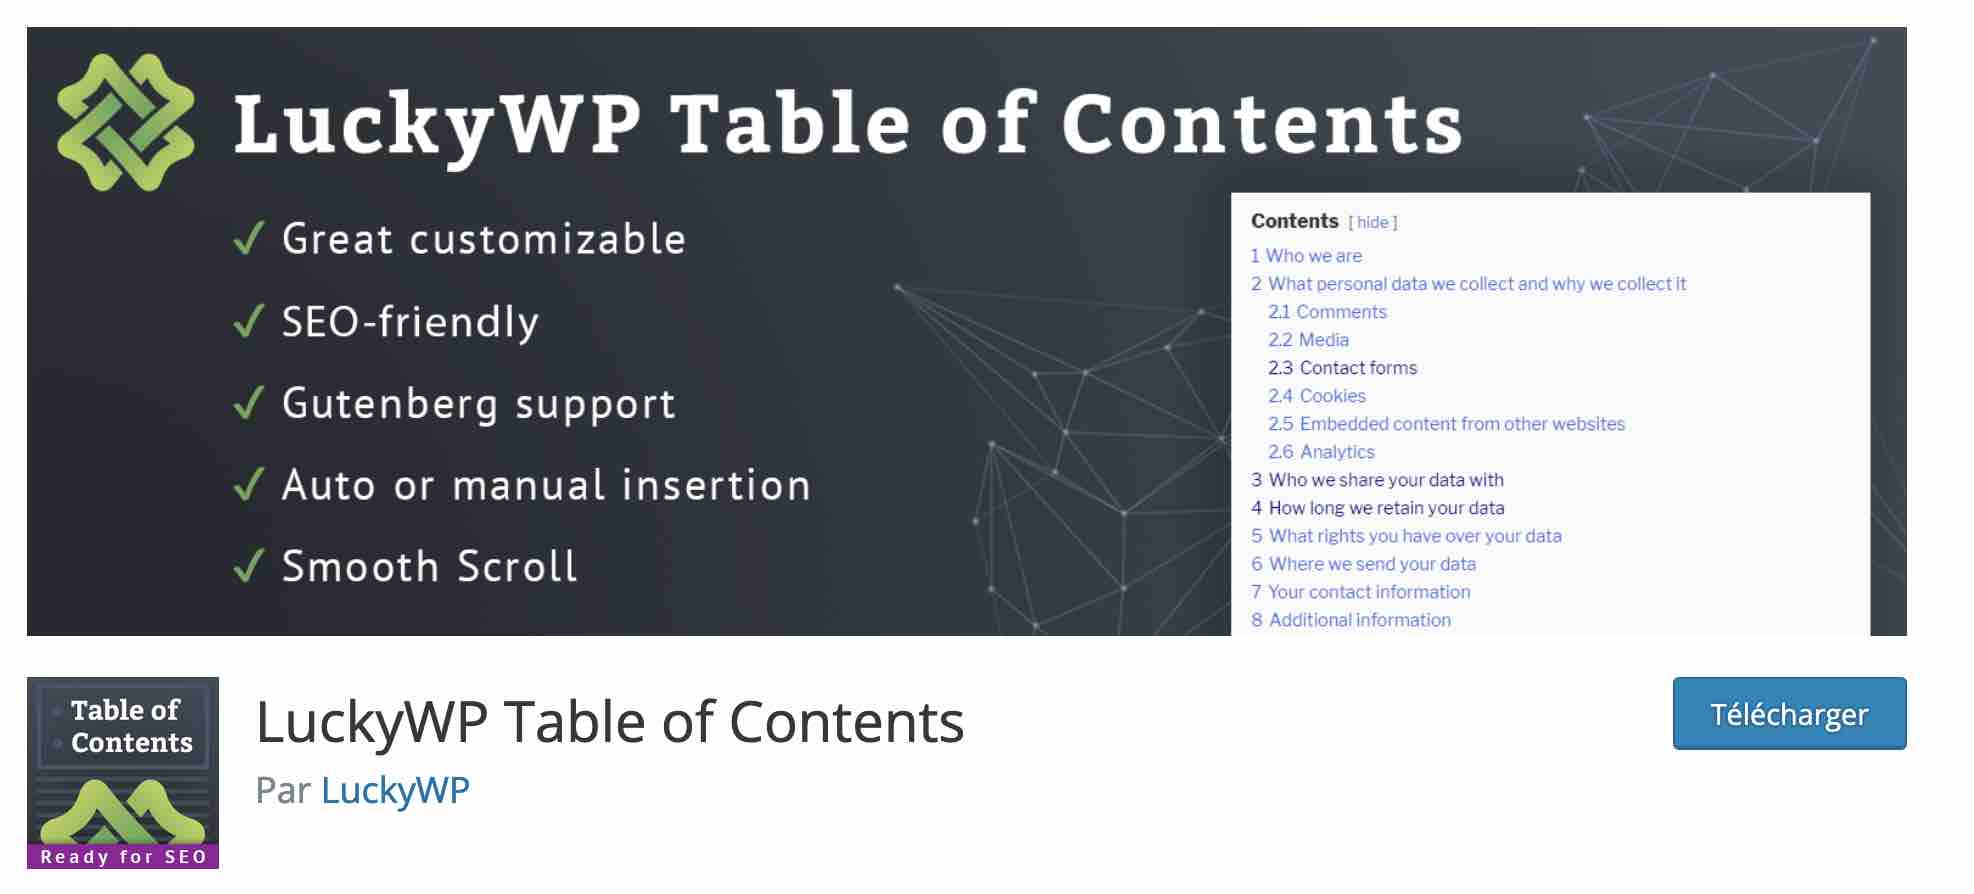 LuckyWP Table of Contents allows you to create a table of contents.